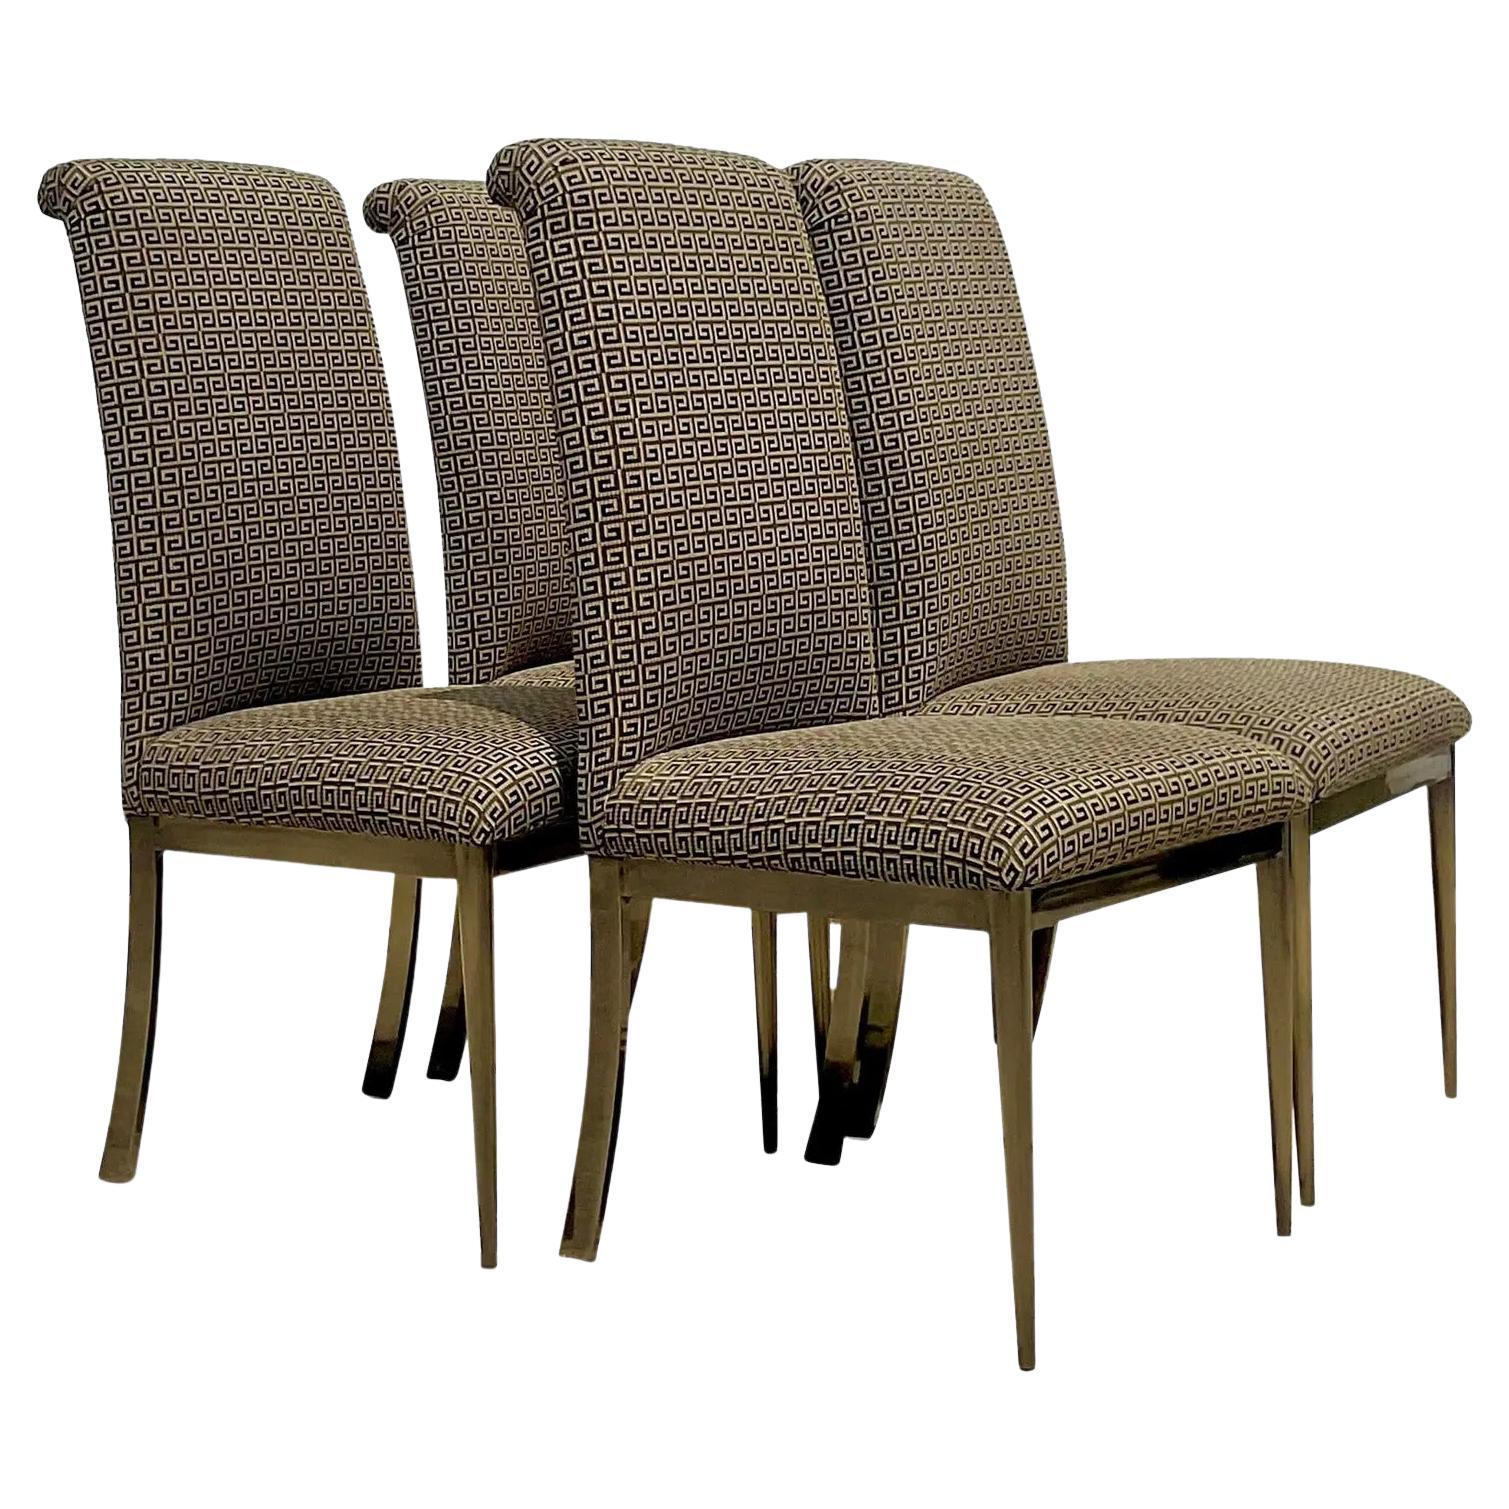 Vintage Contemporary Dia Burnished Brass Dining Chairs - Set of 4 For Sale